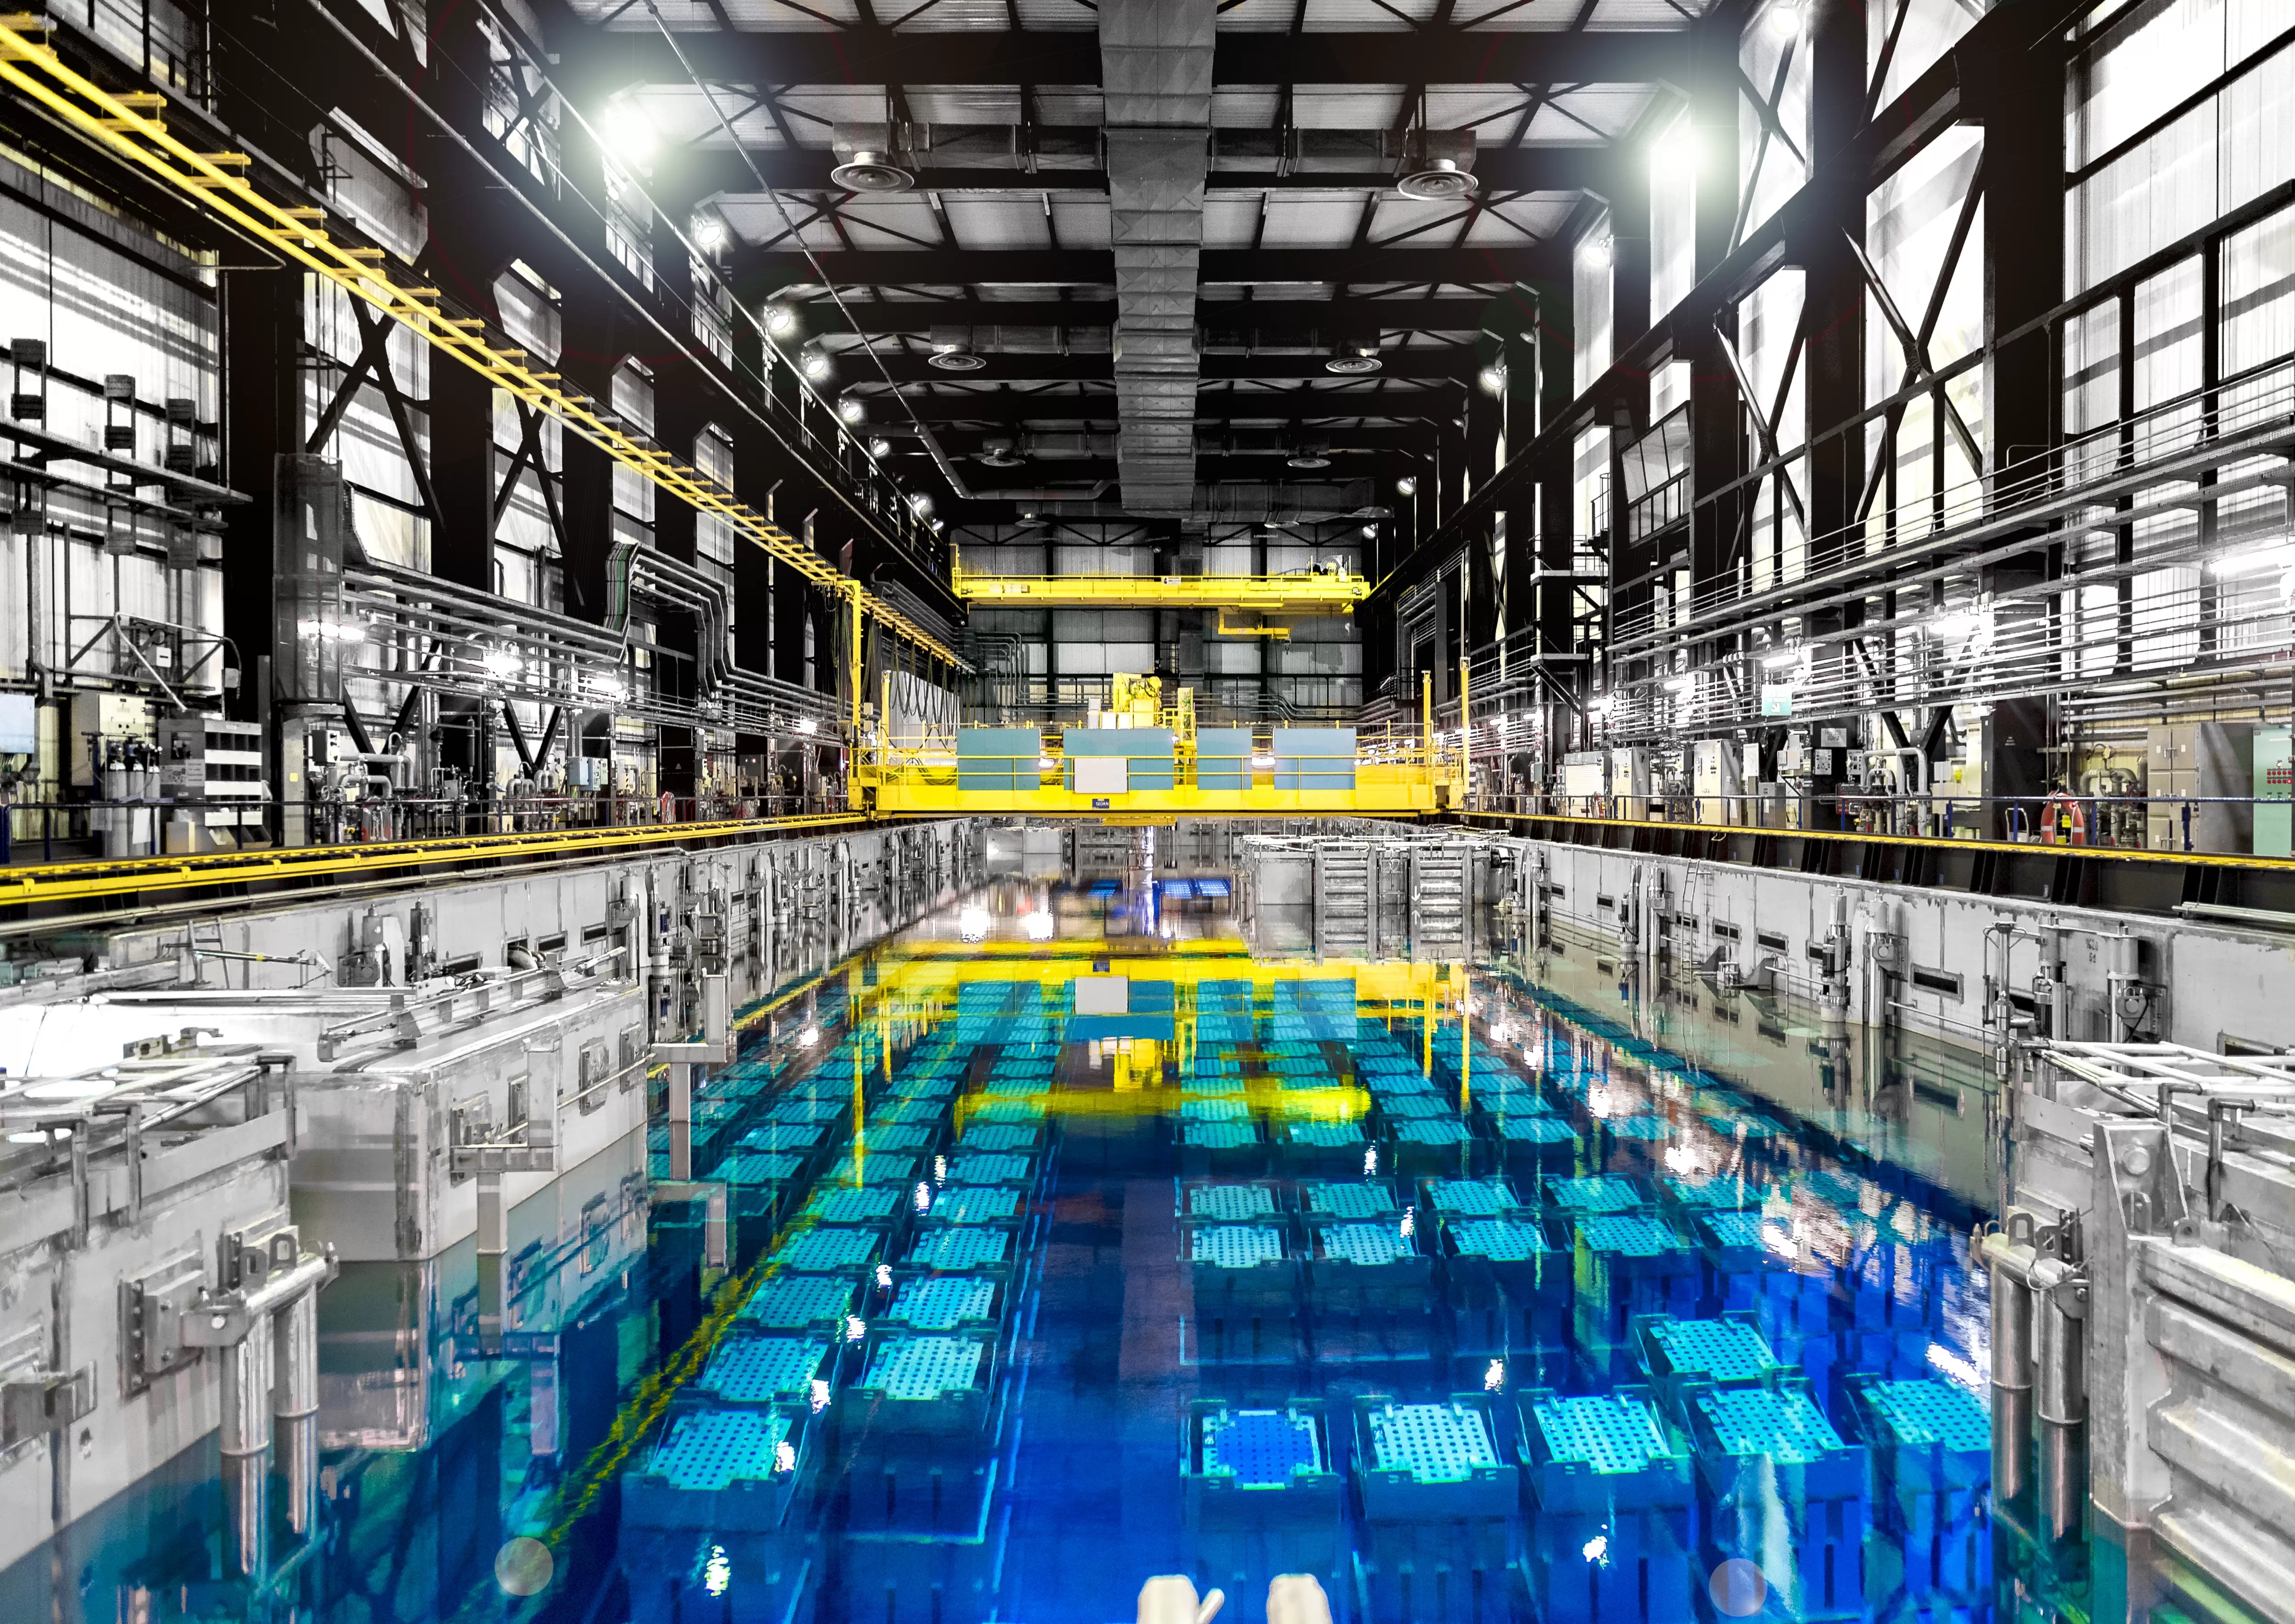 Storage pool at the La Hague reprocessing plant in France with spent fuel assemblies for reprocessing. Photo: Orano